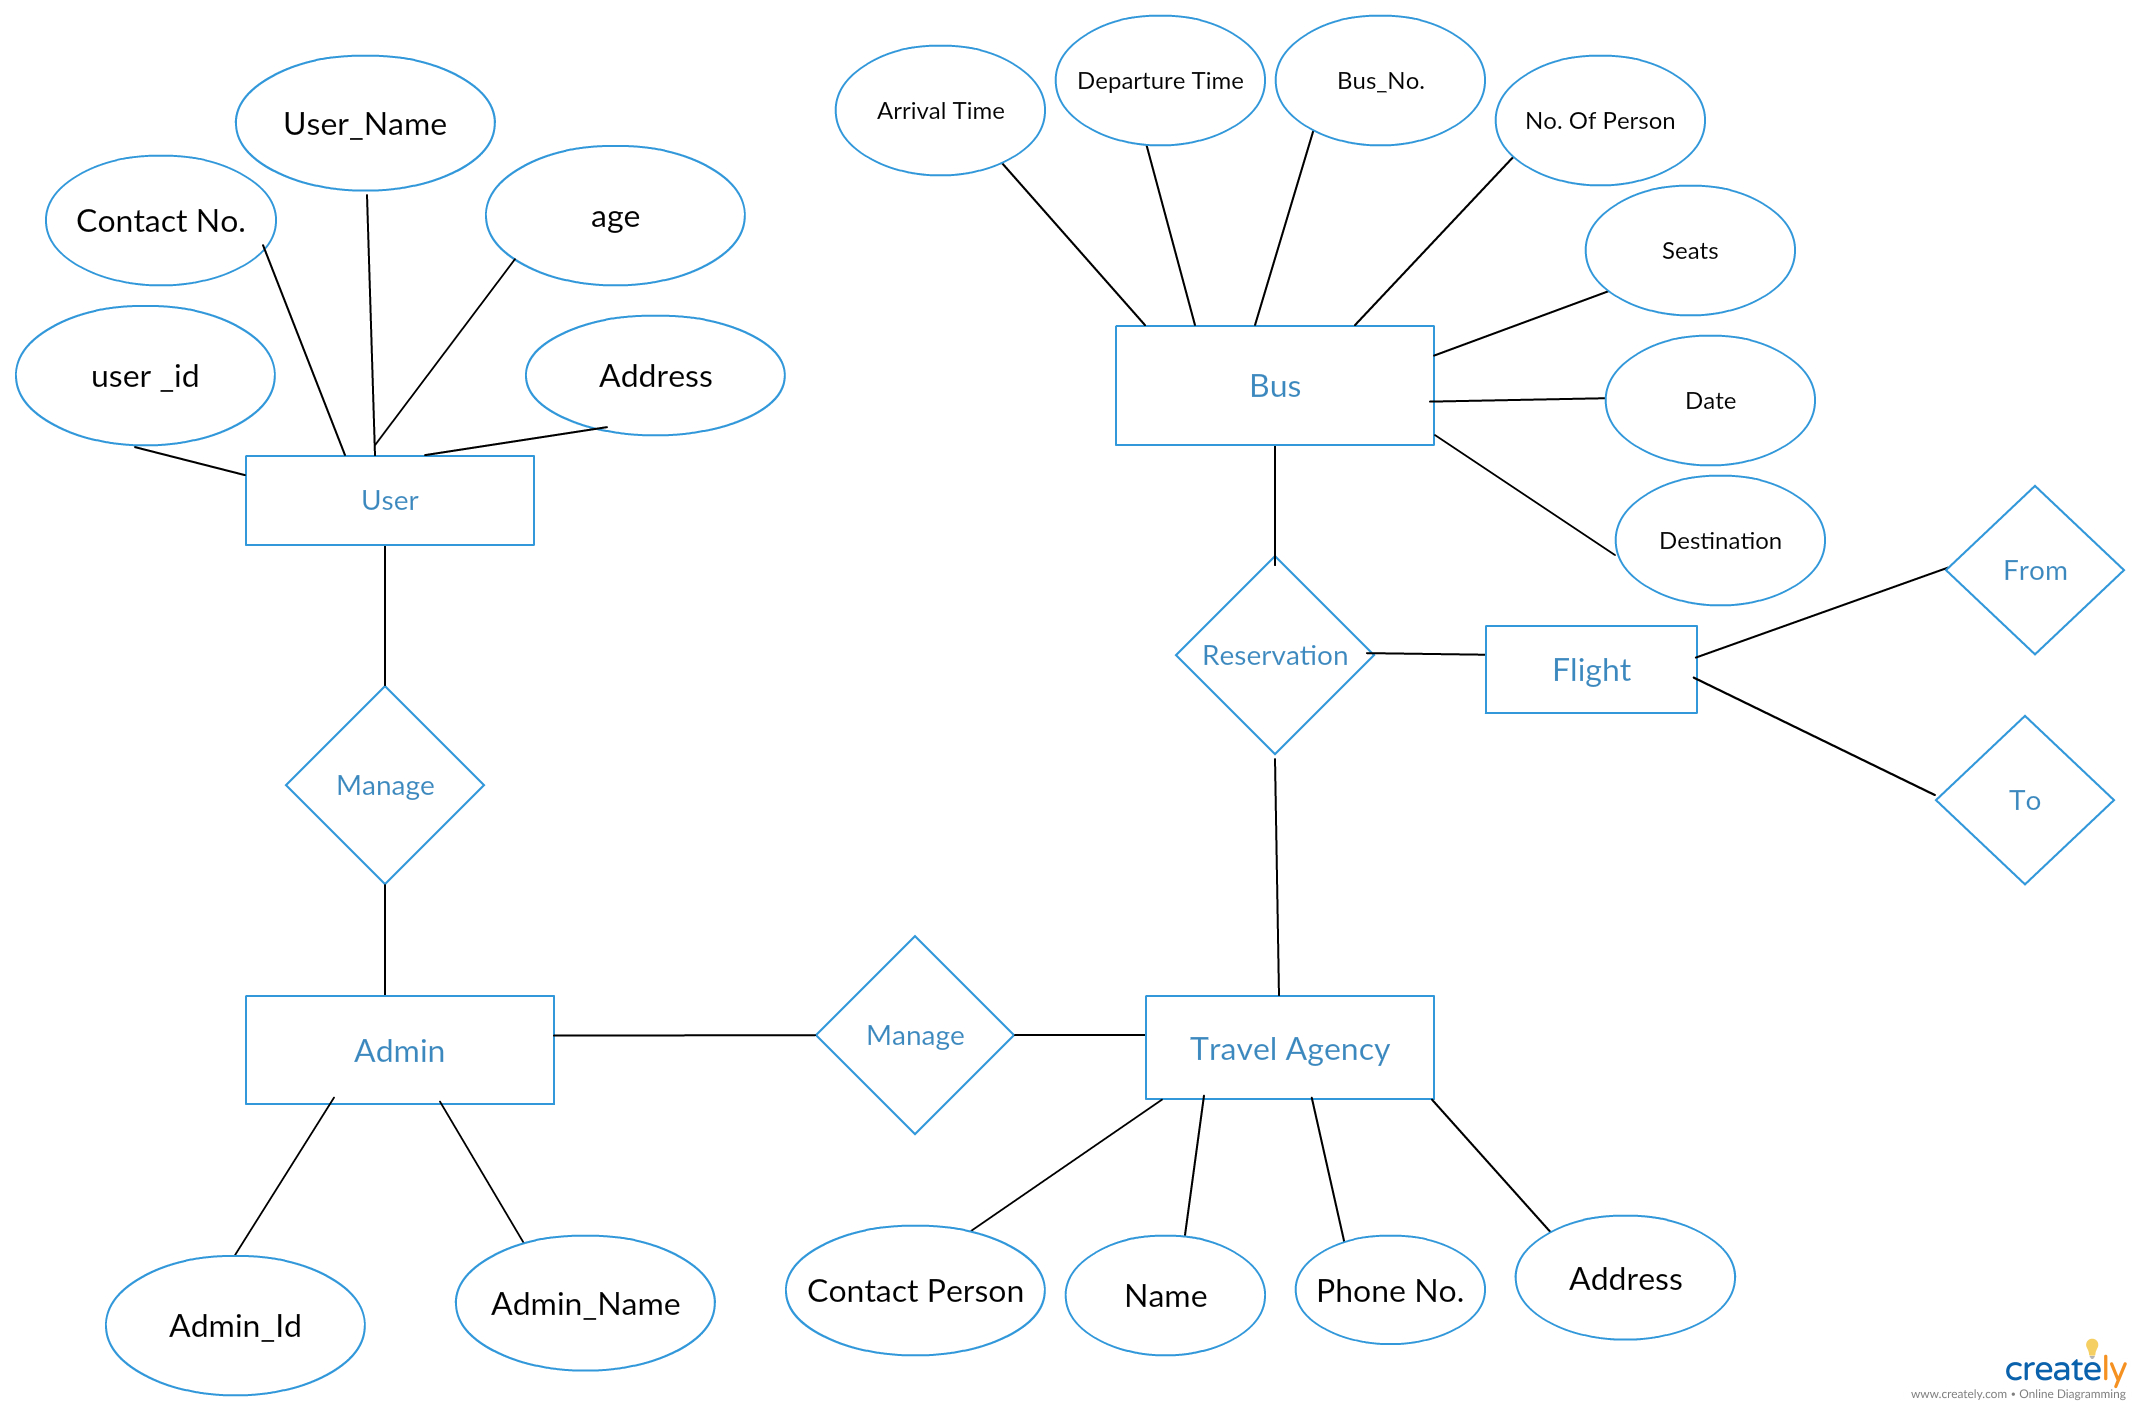 Entity Relationship Diagram Of Tour And Travel - You Can regarding Er Diagram In Word